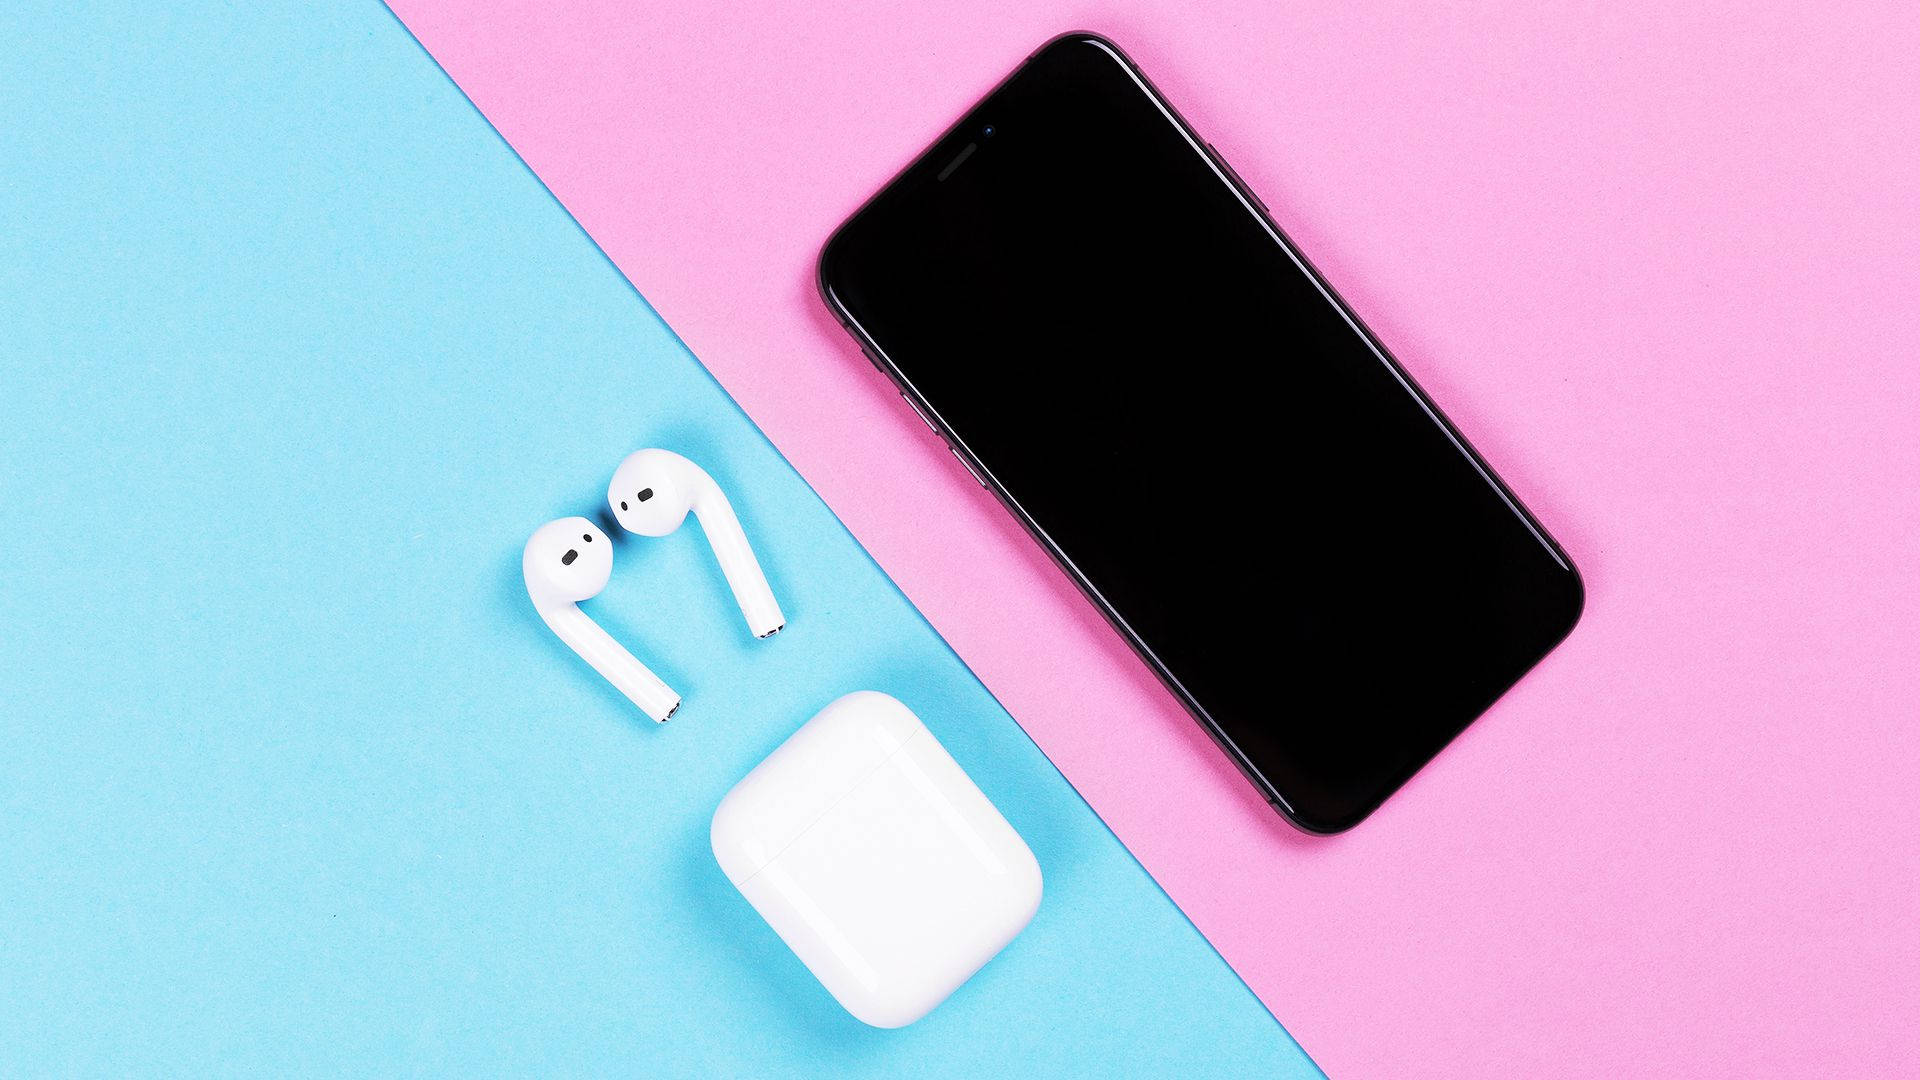 AirPods In Pink&Blue Wallpaper